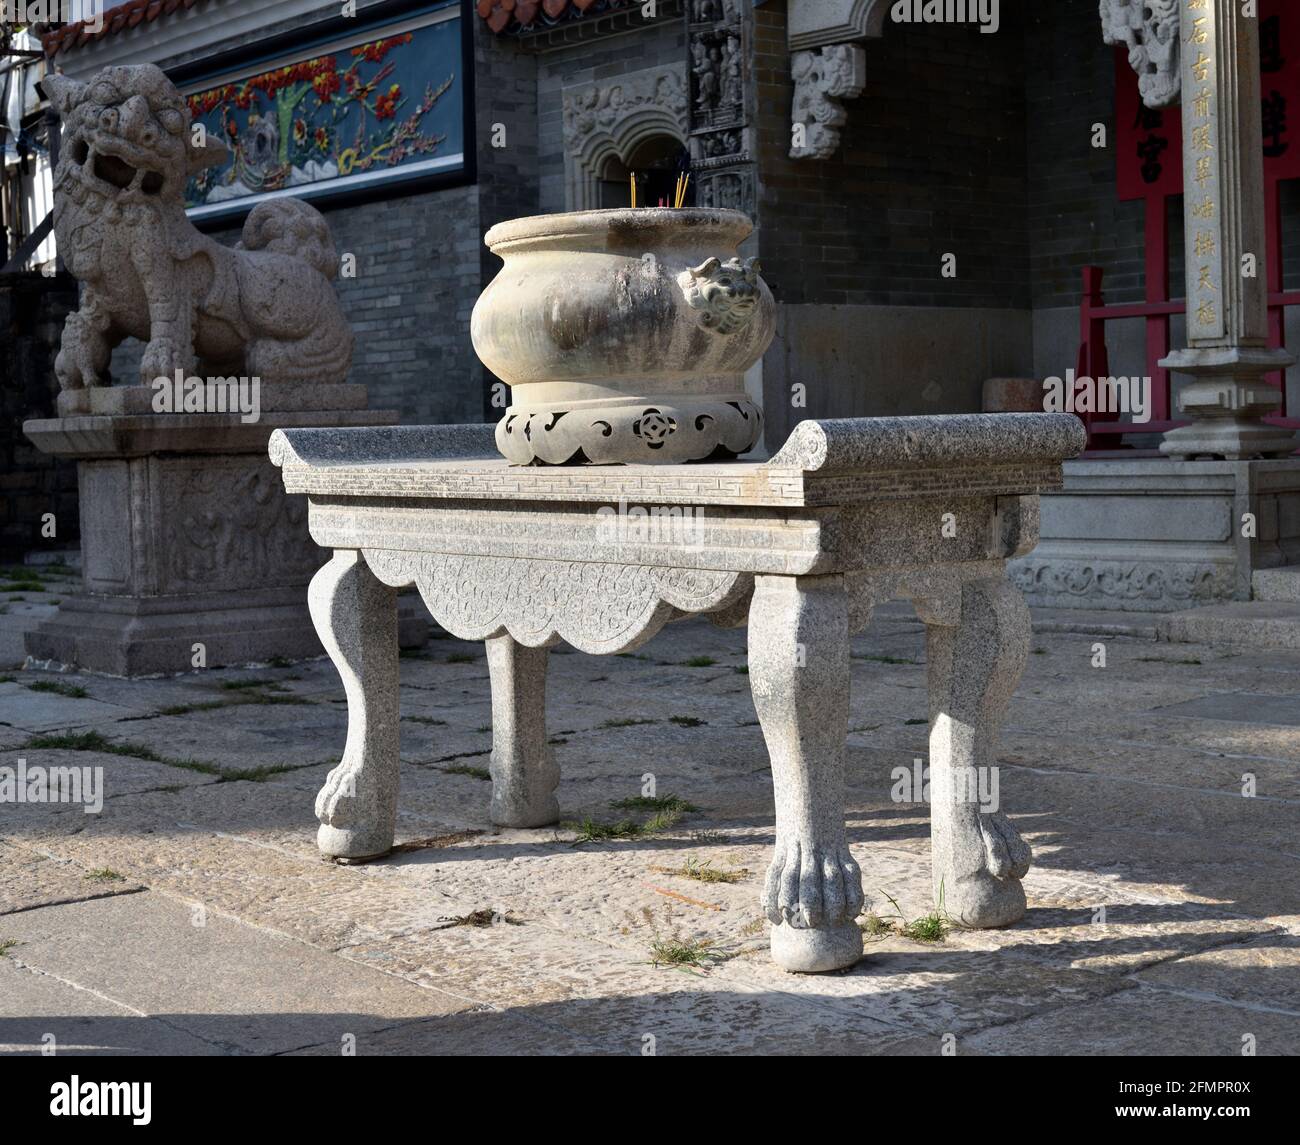 Round Stone incense burner on a curved legs stand in front of Yuk Hui Kung, aka Pak Tai Temple, Cheung Chau, Hong Kong. Stock Photo